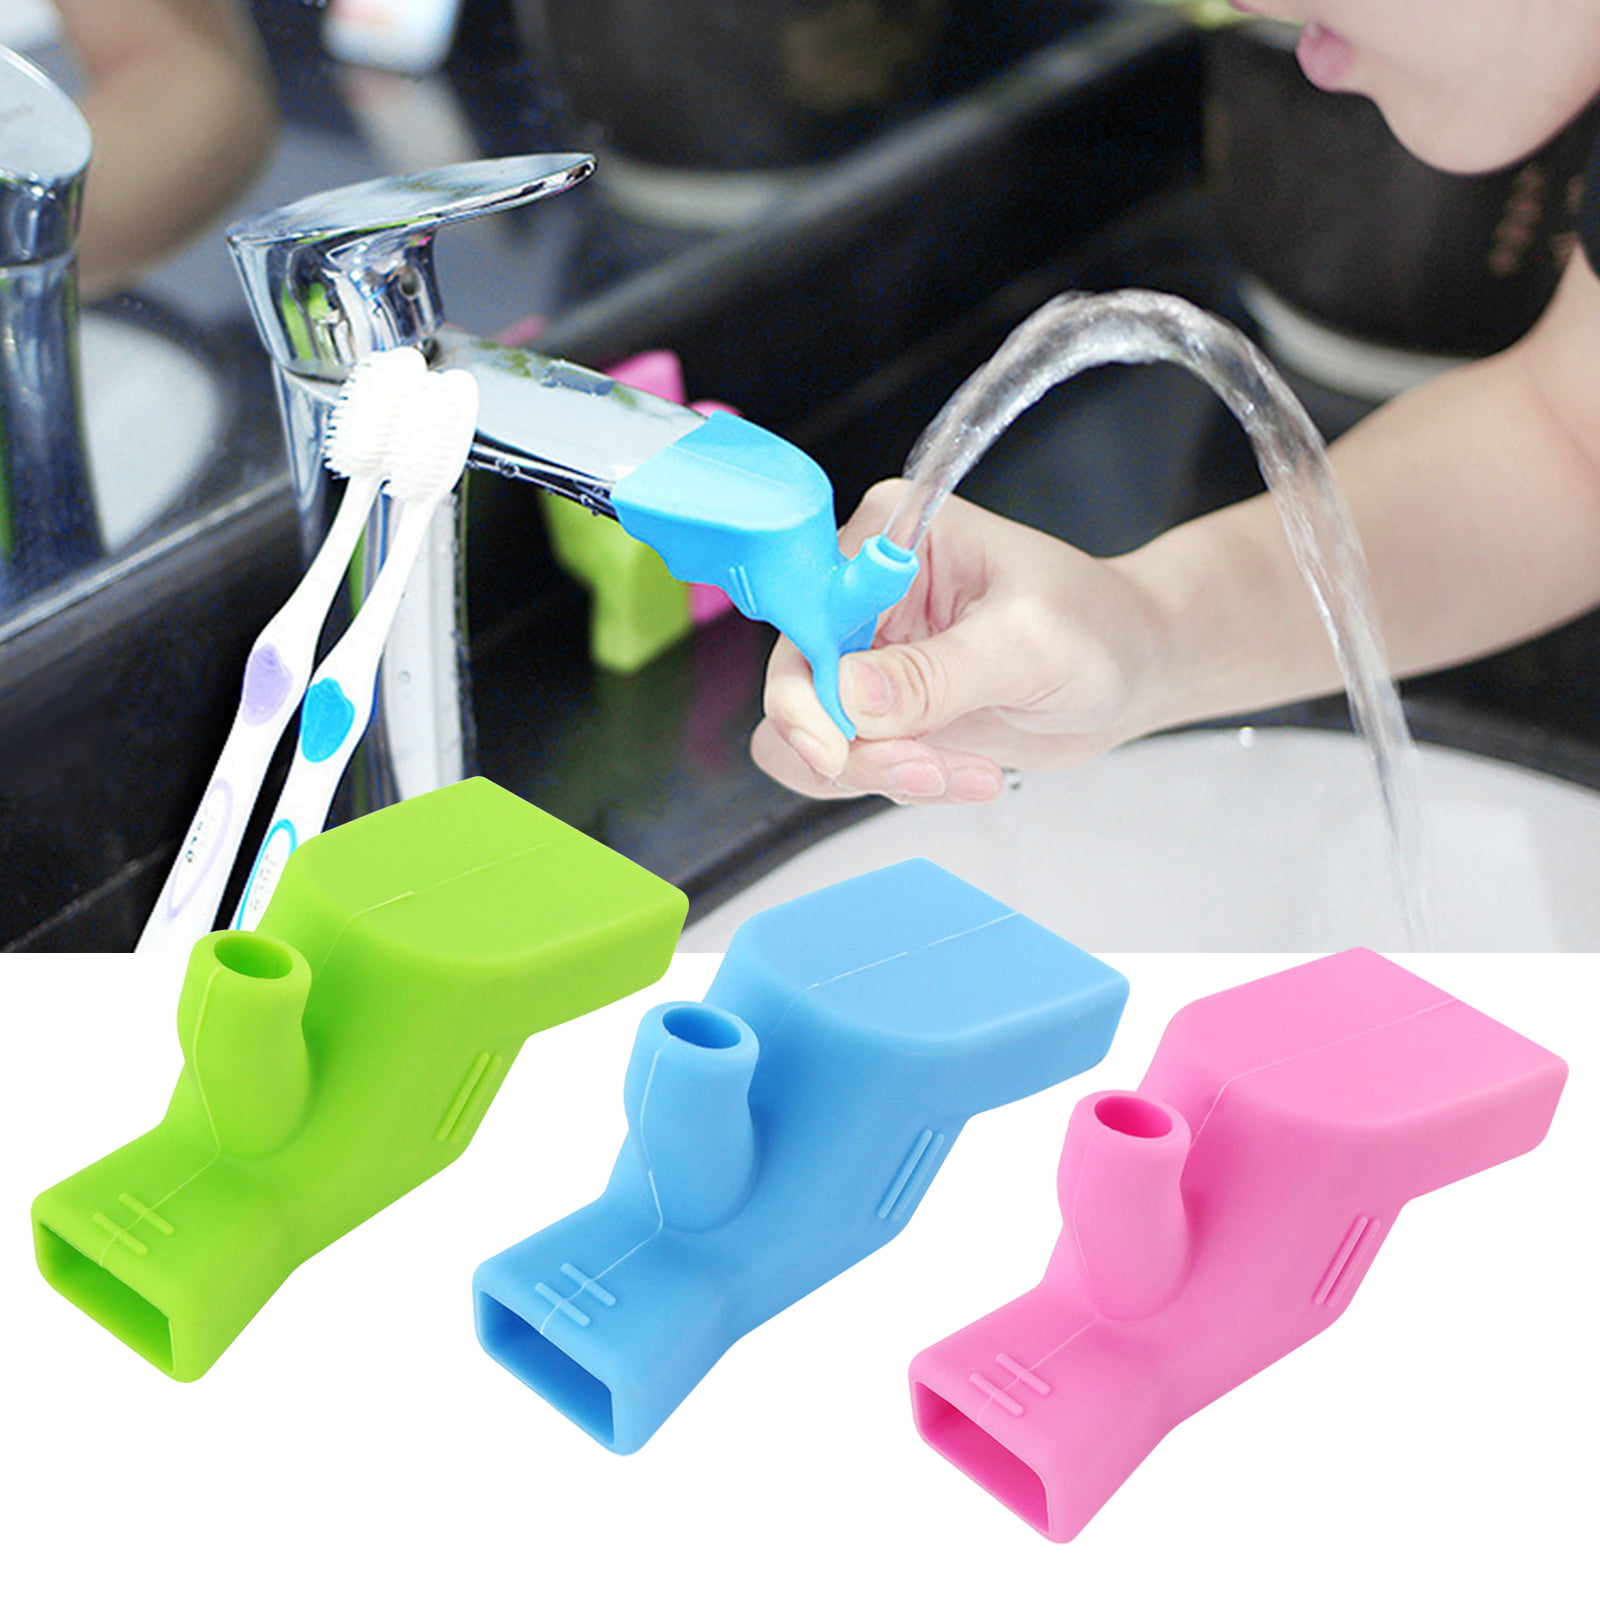 3Pcs Silicone Faucet Water Tap Extender Spout Hand Washing Water Faucet Sink  Extender for Kids Baby Children Toddler By ZIAERKOR 